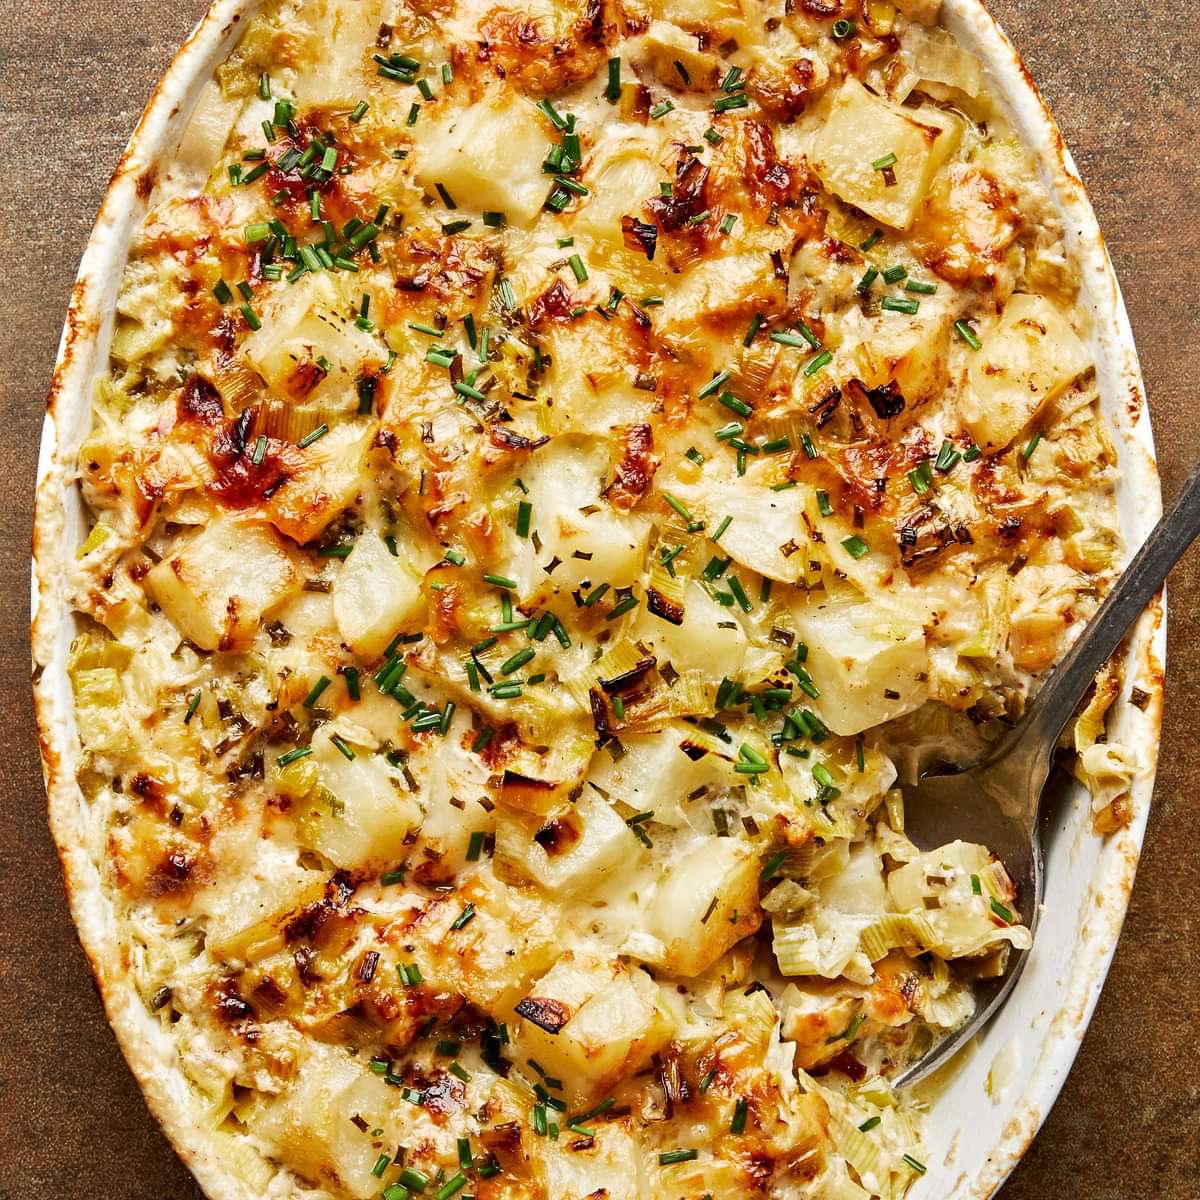 potato leek au gratin made with gruyère, parmesan, blue cheese, butter, cream, spices and ground mustard topped with chives